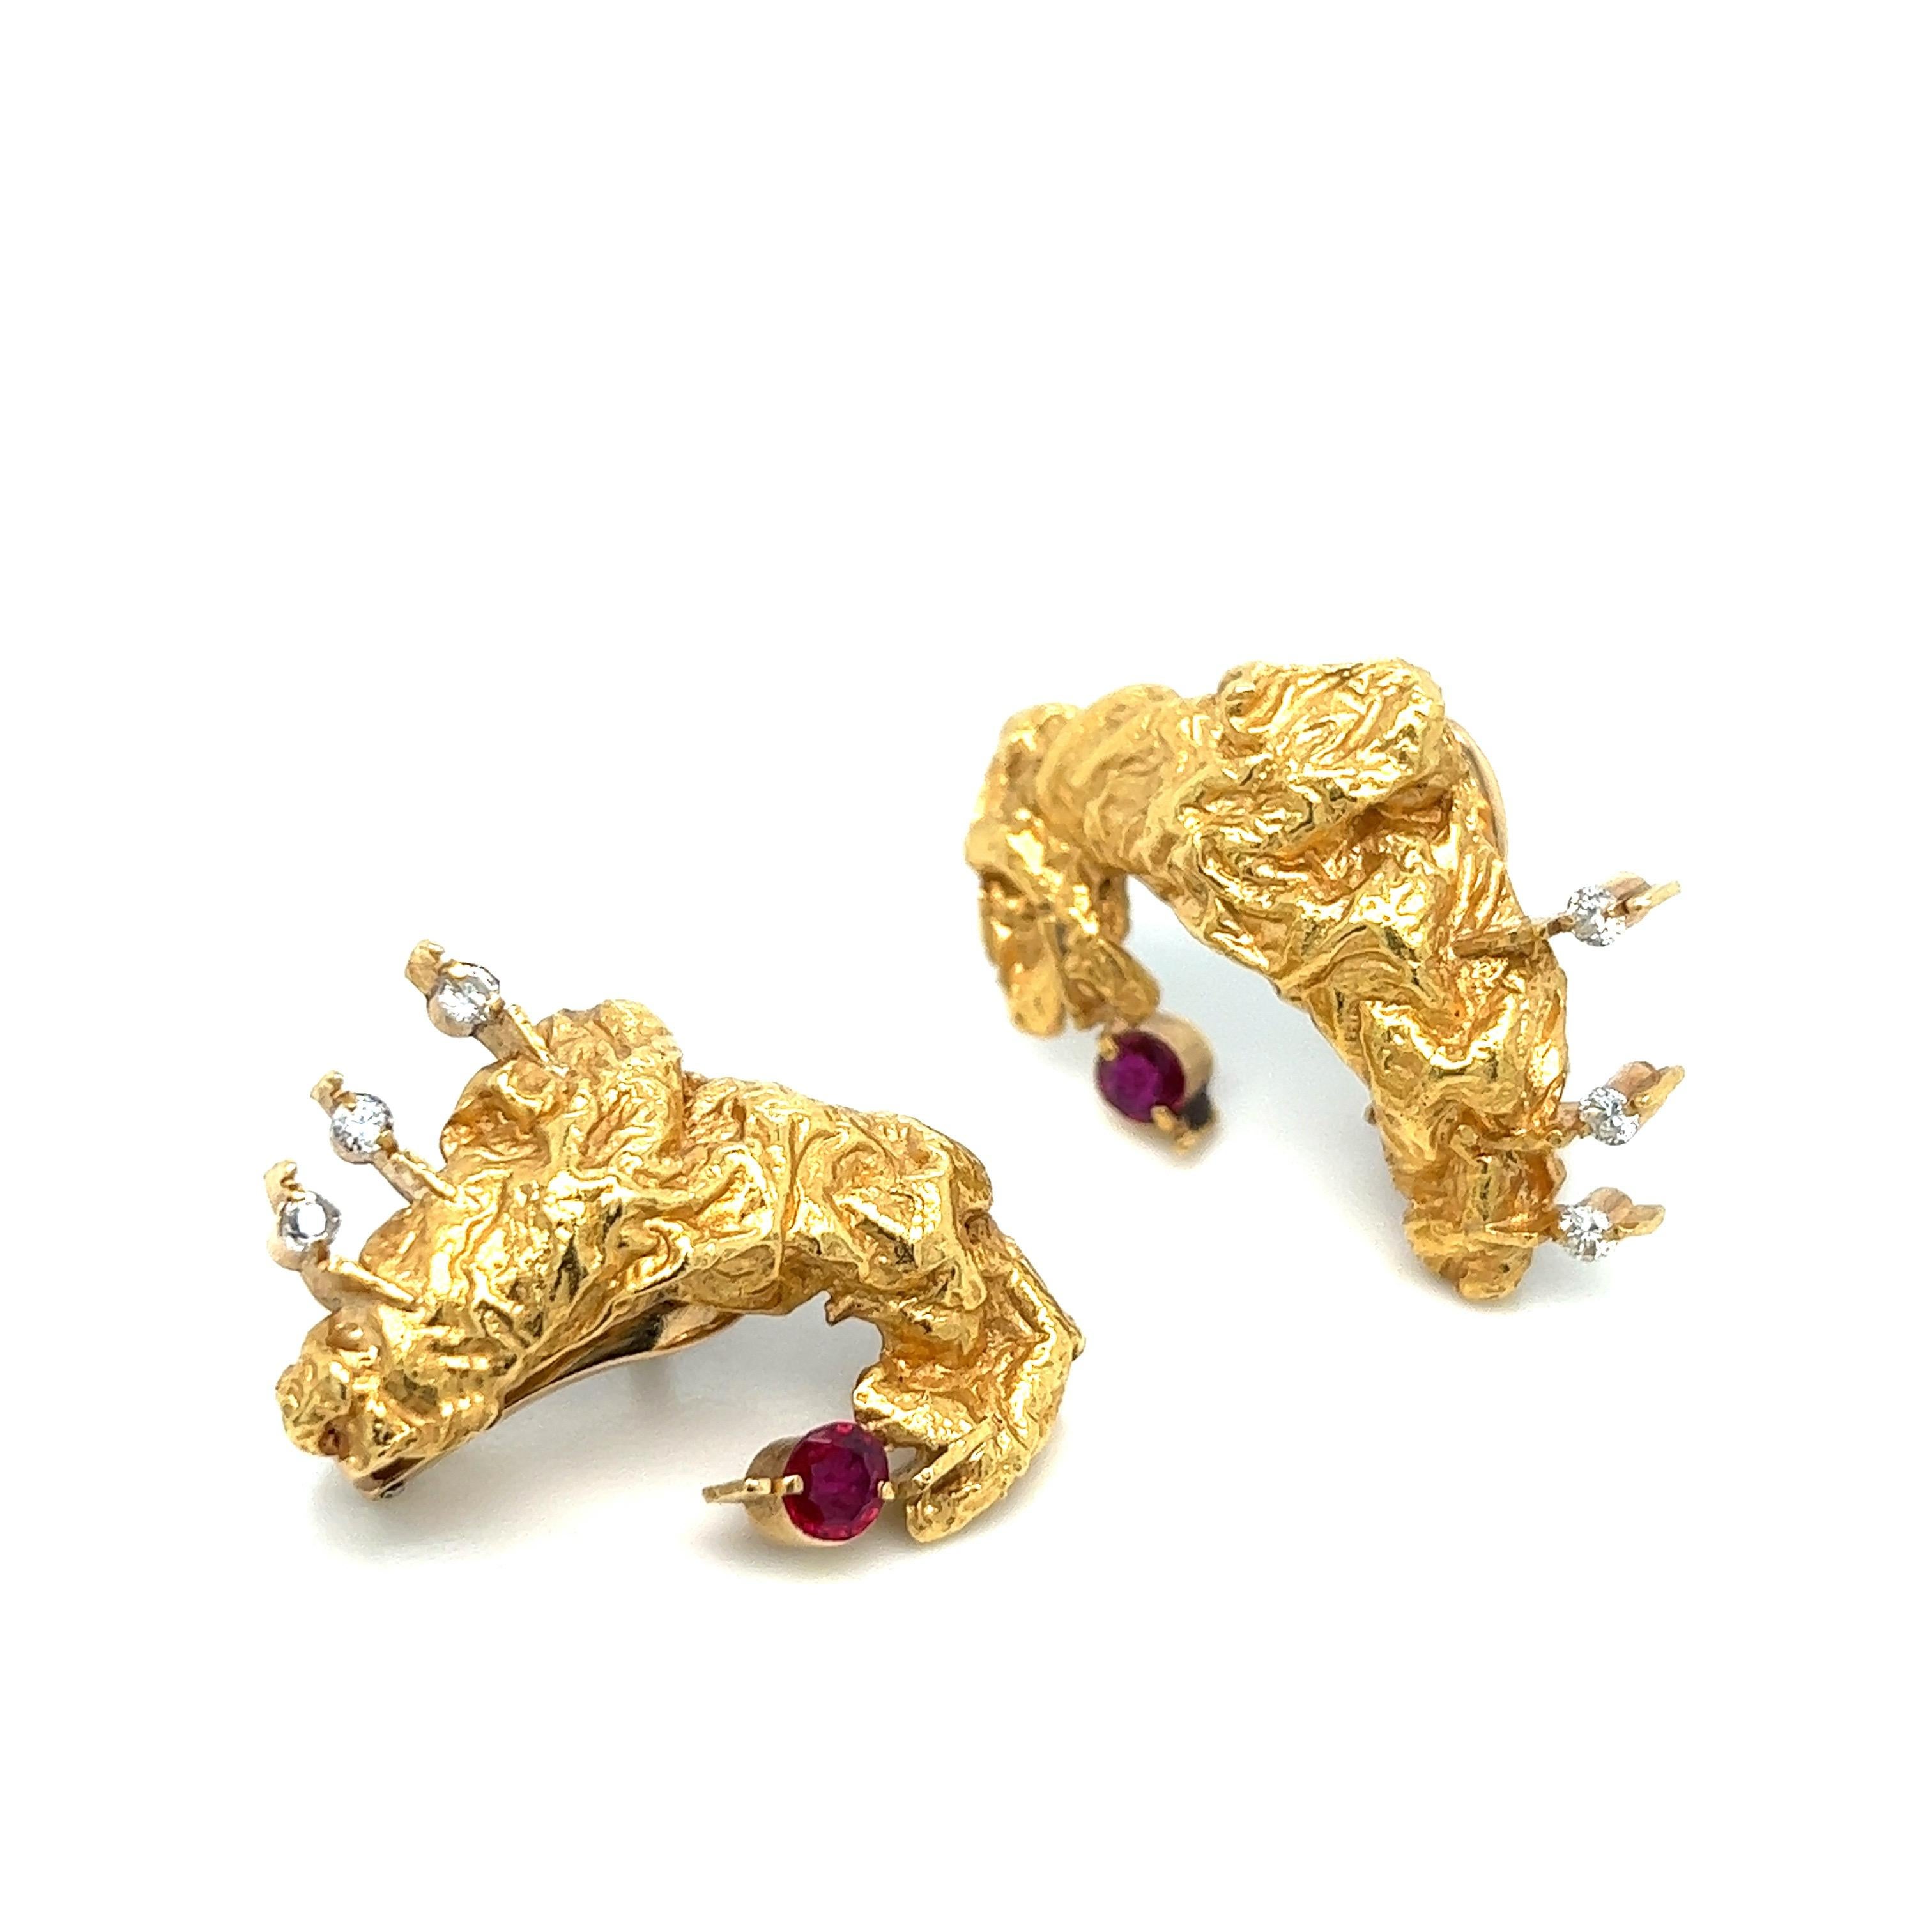 Round Cut Stanley Lechtzin Gold Ruby Diamond Ear Clips For Sale